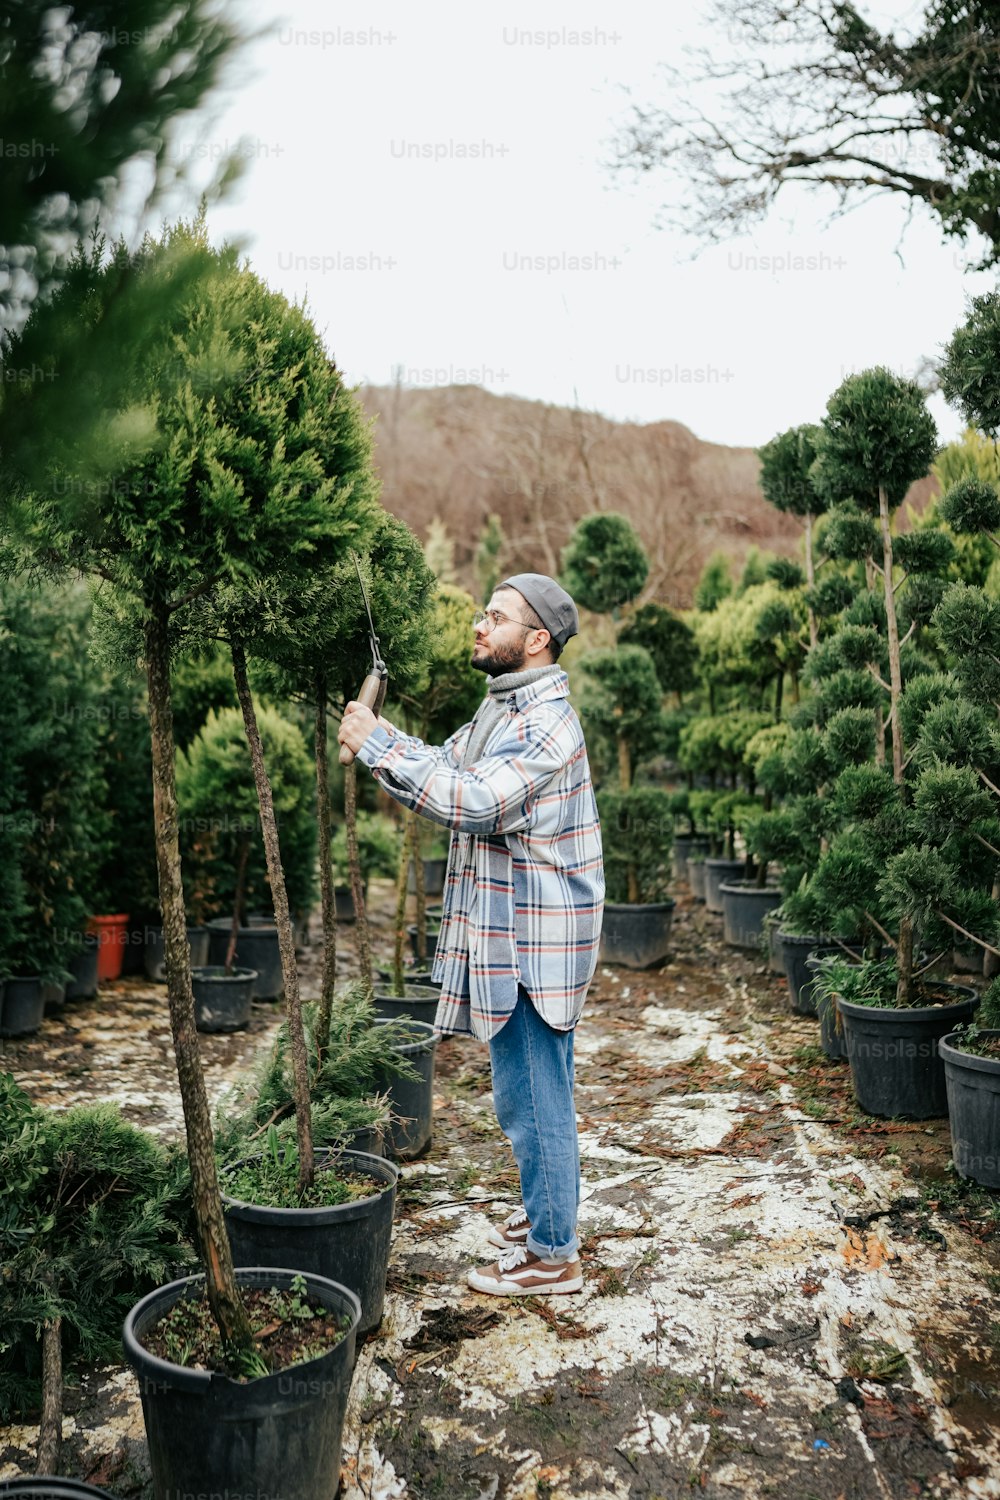 a man in a plaid shirt is standing in a tree nursery